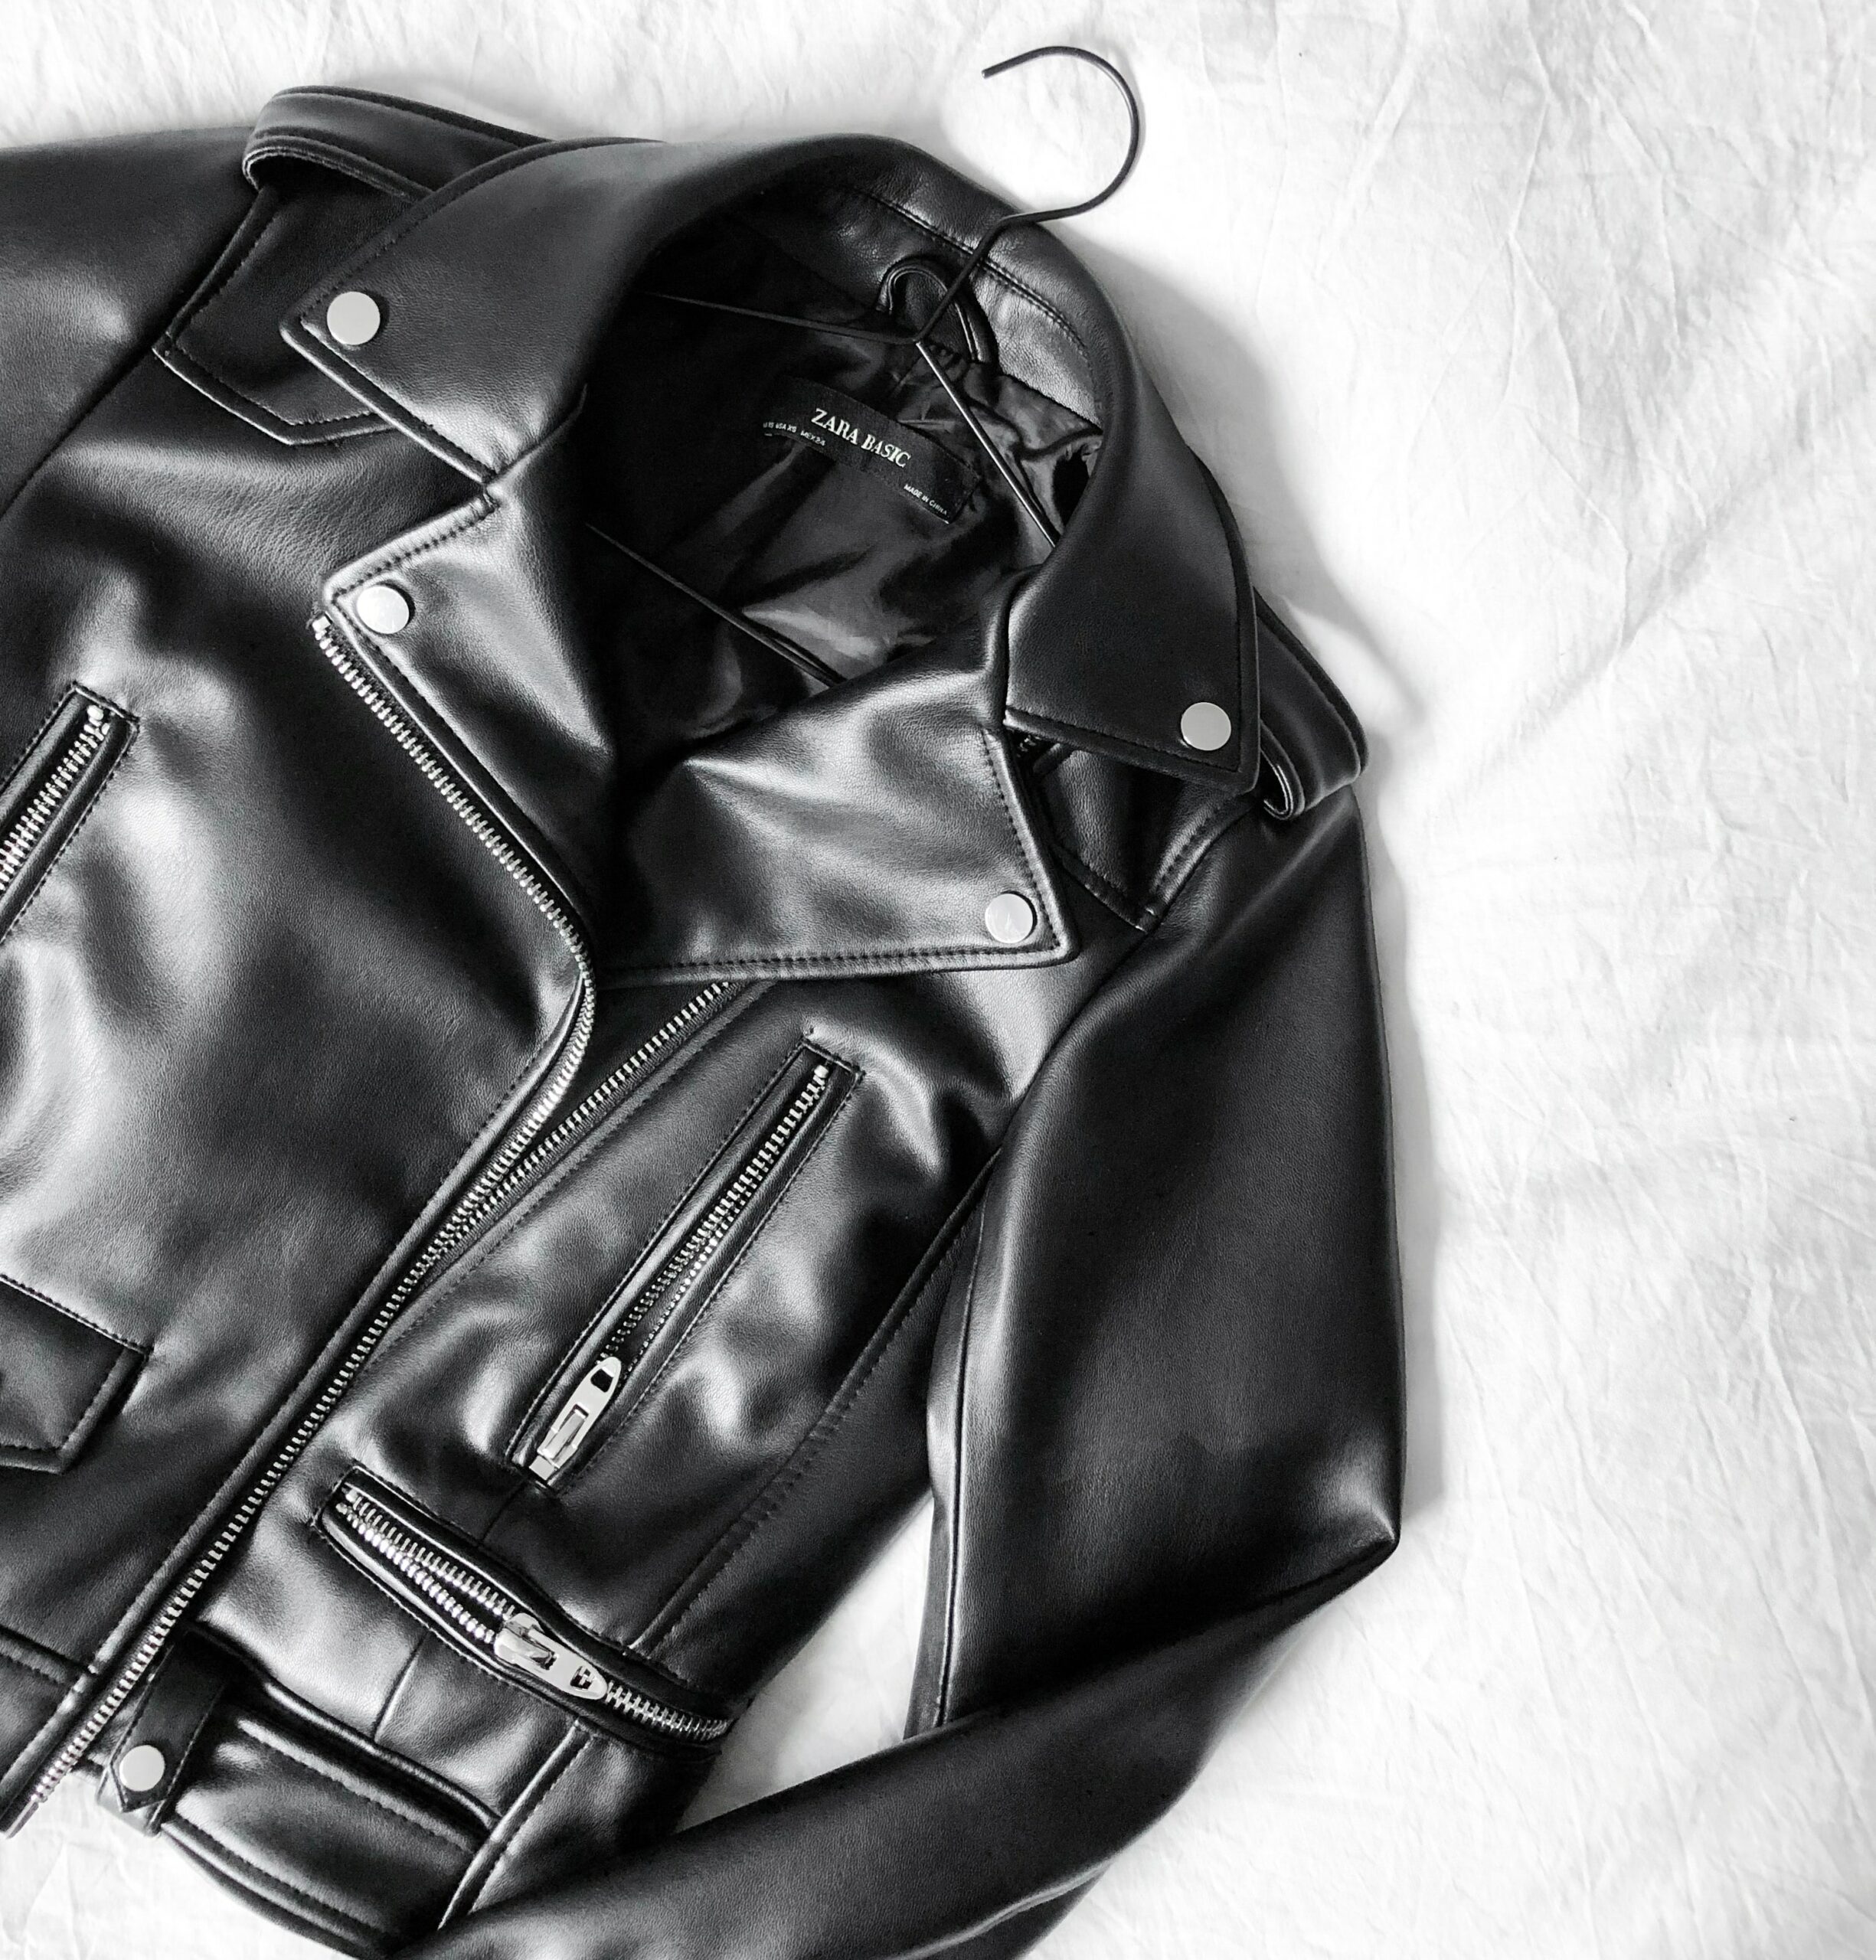 26 Leather Jacket Outfits – How to Wear a Leather Jacket